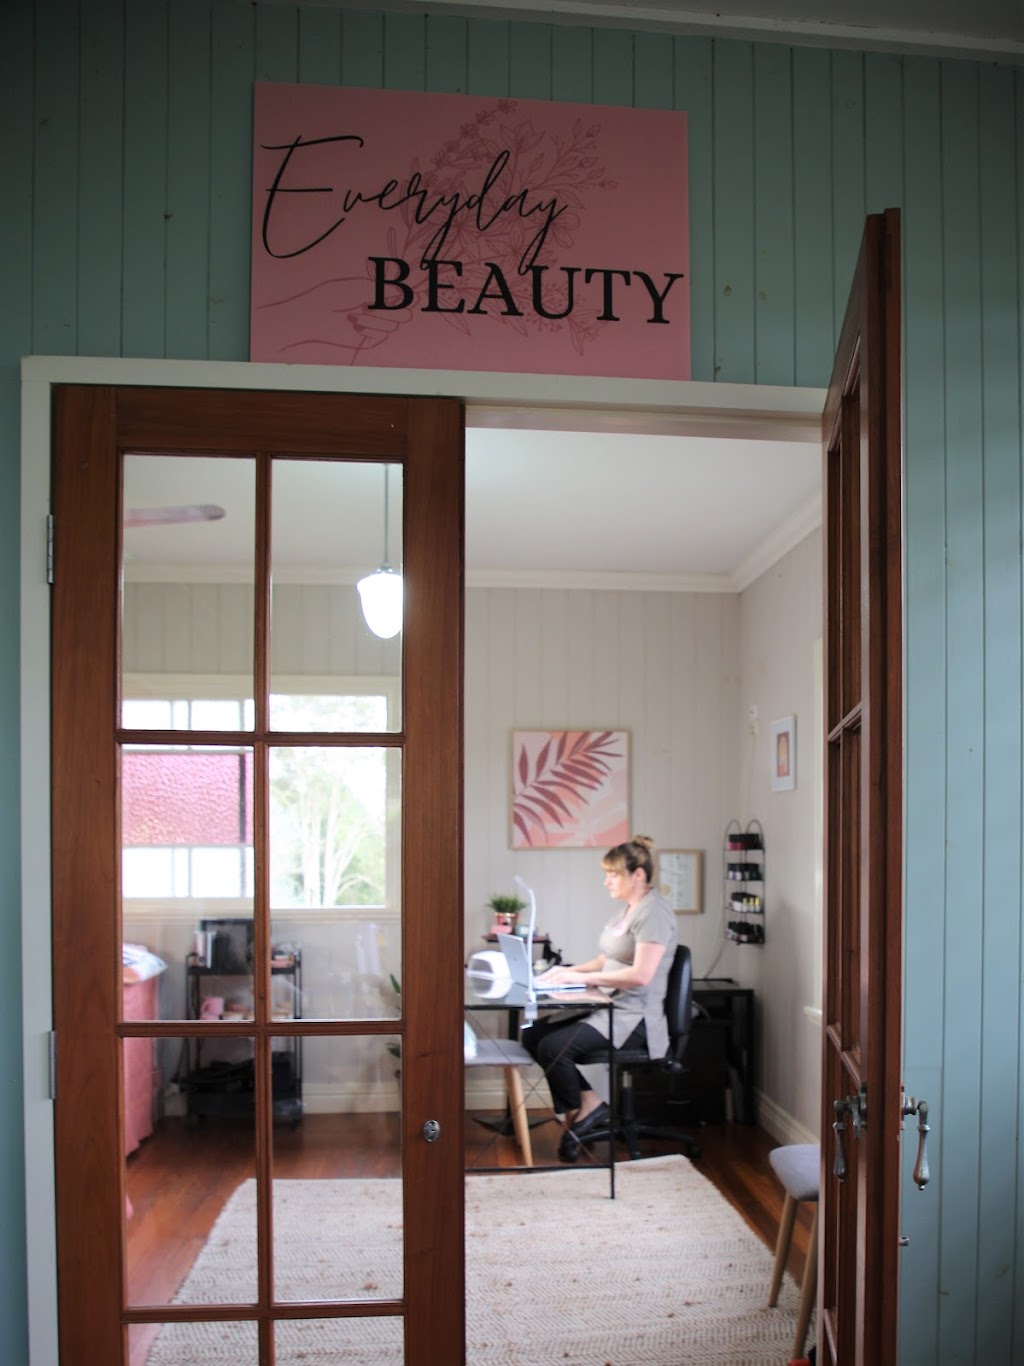 Everyday Beauty | beauty salon | 92 Youngs Rd, Glass House Mountains QLD 4518, Australia | 0402544853 OR +61 402 544 853